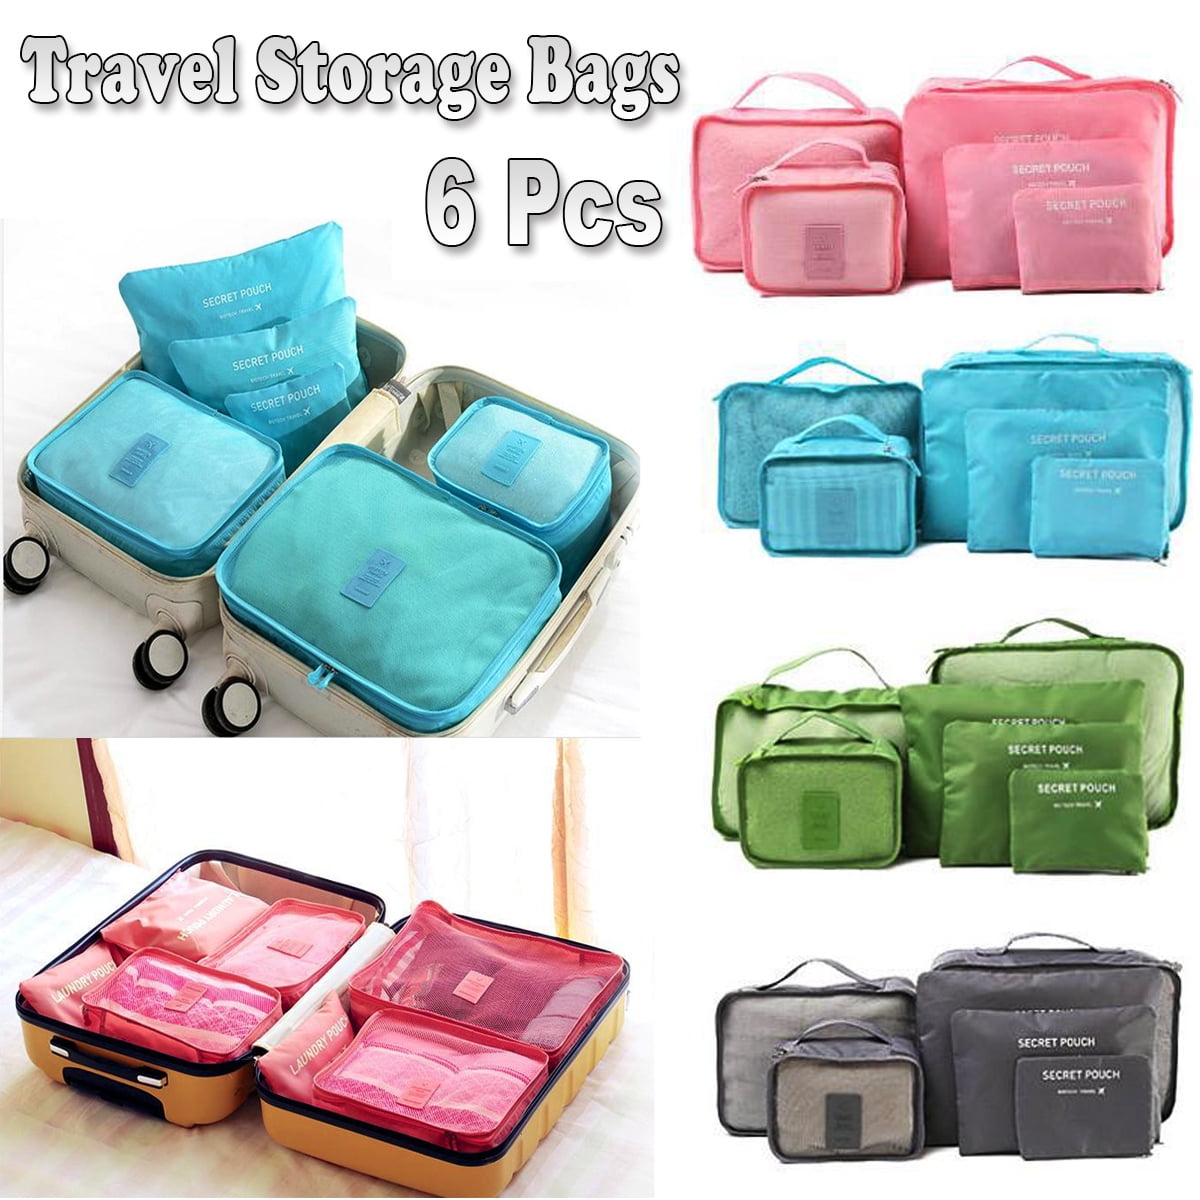 6 Pcs Waterproof Travel Clothes Storage Bags Luggage Organizer Pouch Packing